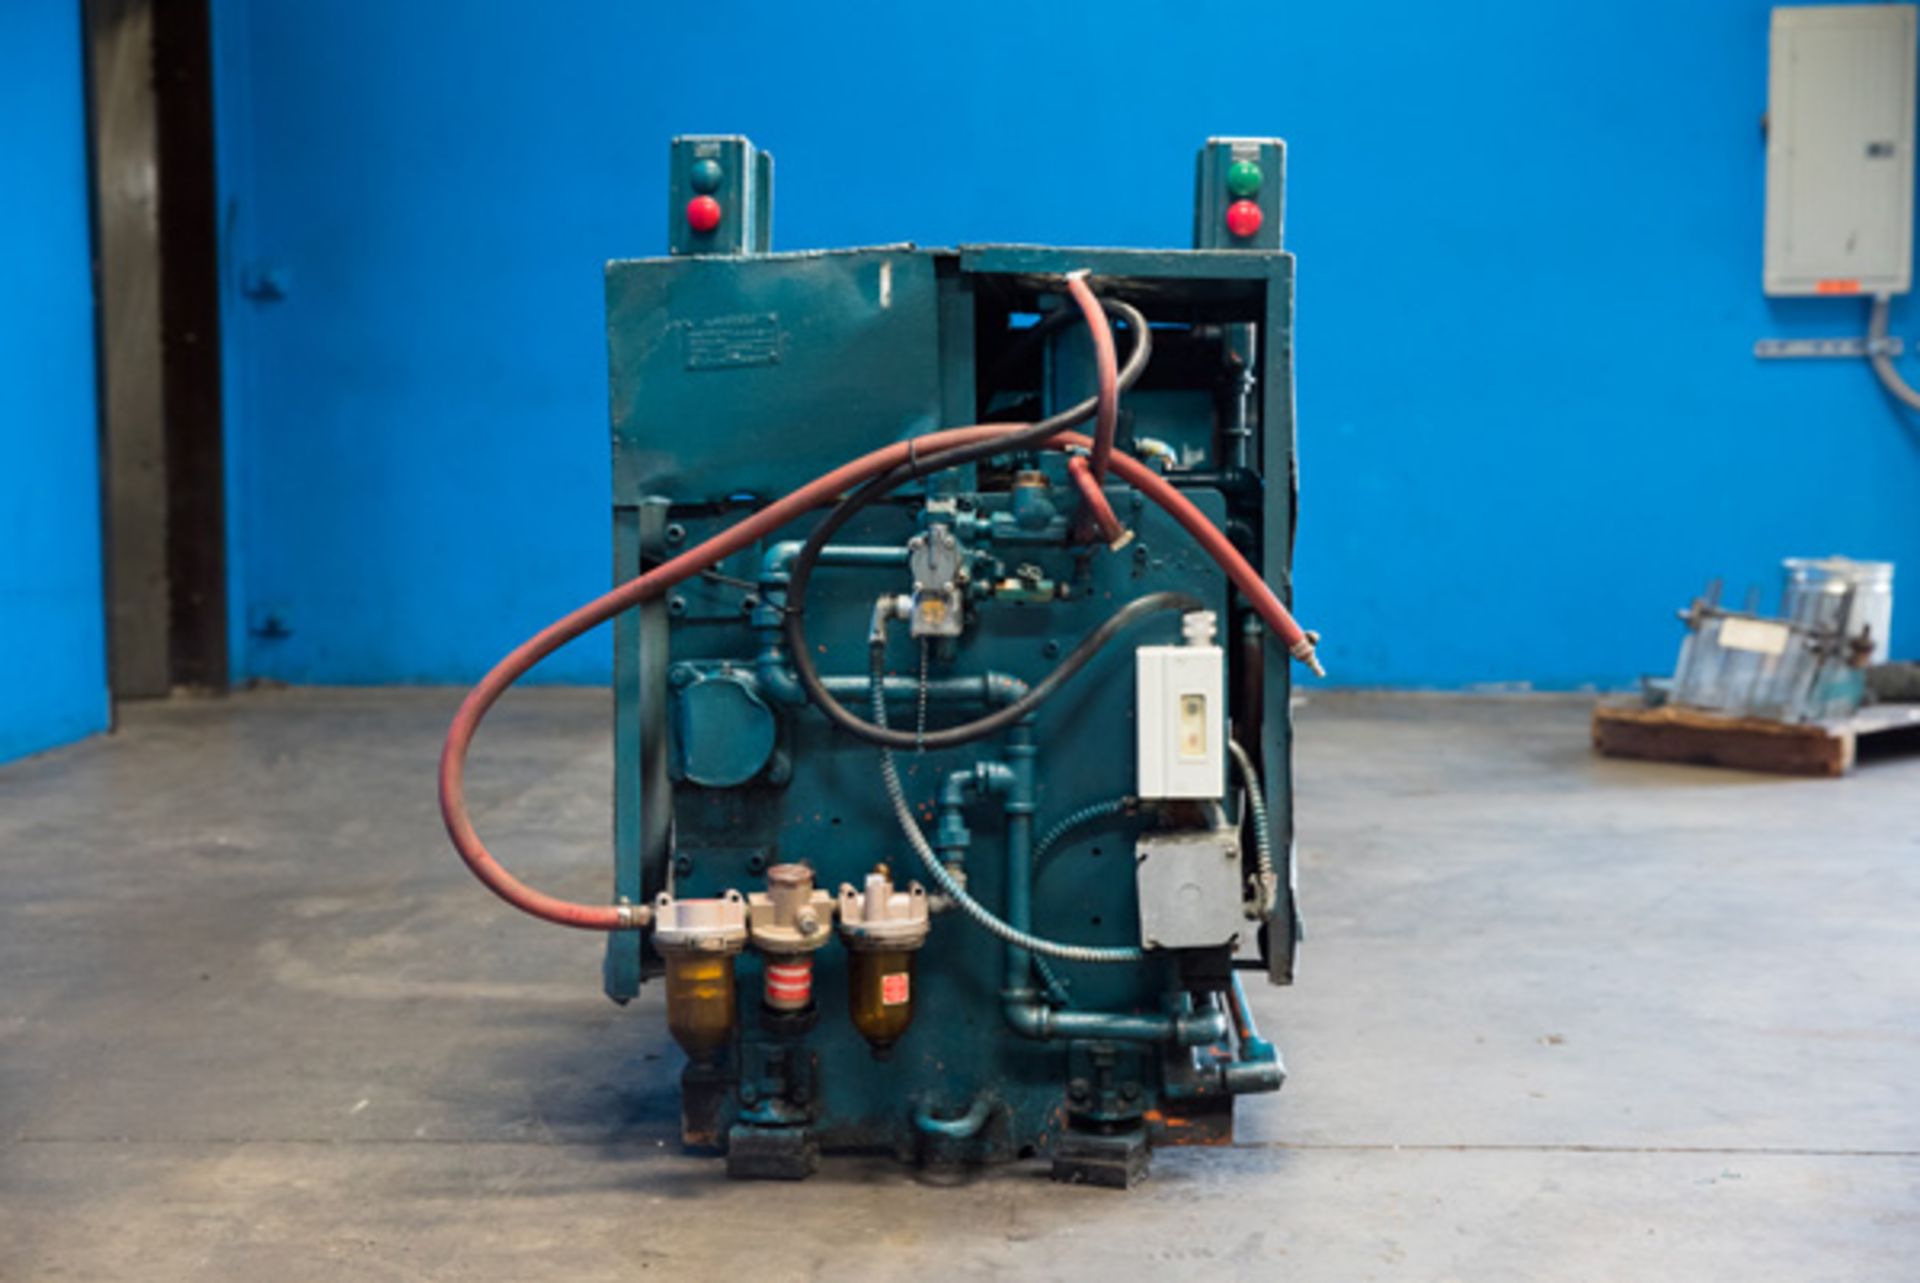 Dual End Can Bead Flanging Machine, Located In: Huntington Park, CA - 7181 - Image 6 of 14